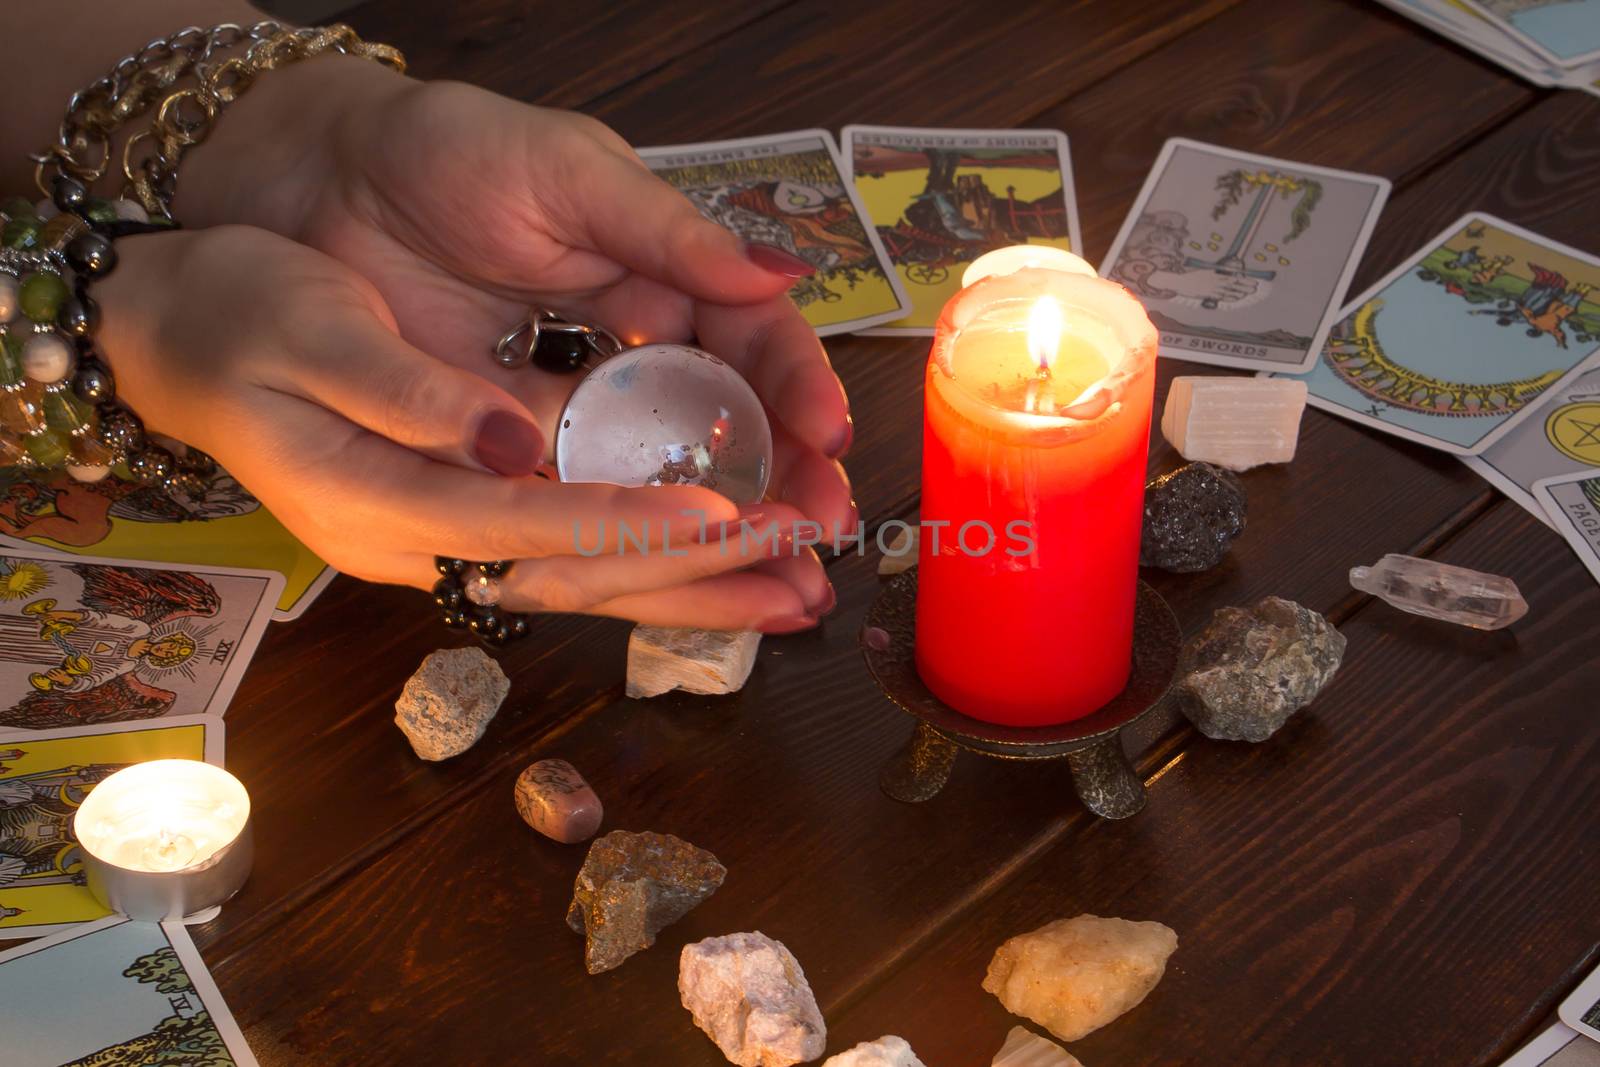 Bangkok,Thailand,March.15.20. A fortune teller holds a magic ball.On the table are fortune-telling cards and lighted candle.Magic sessions with clairvoyance cards.Reading maps by candlelight